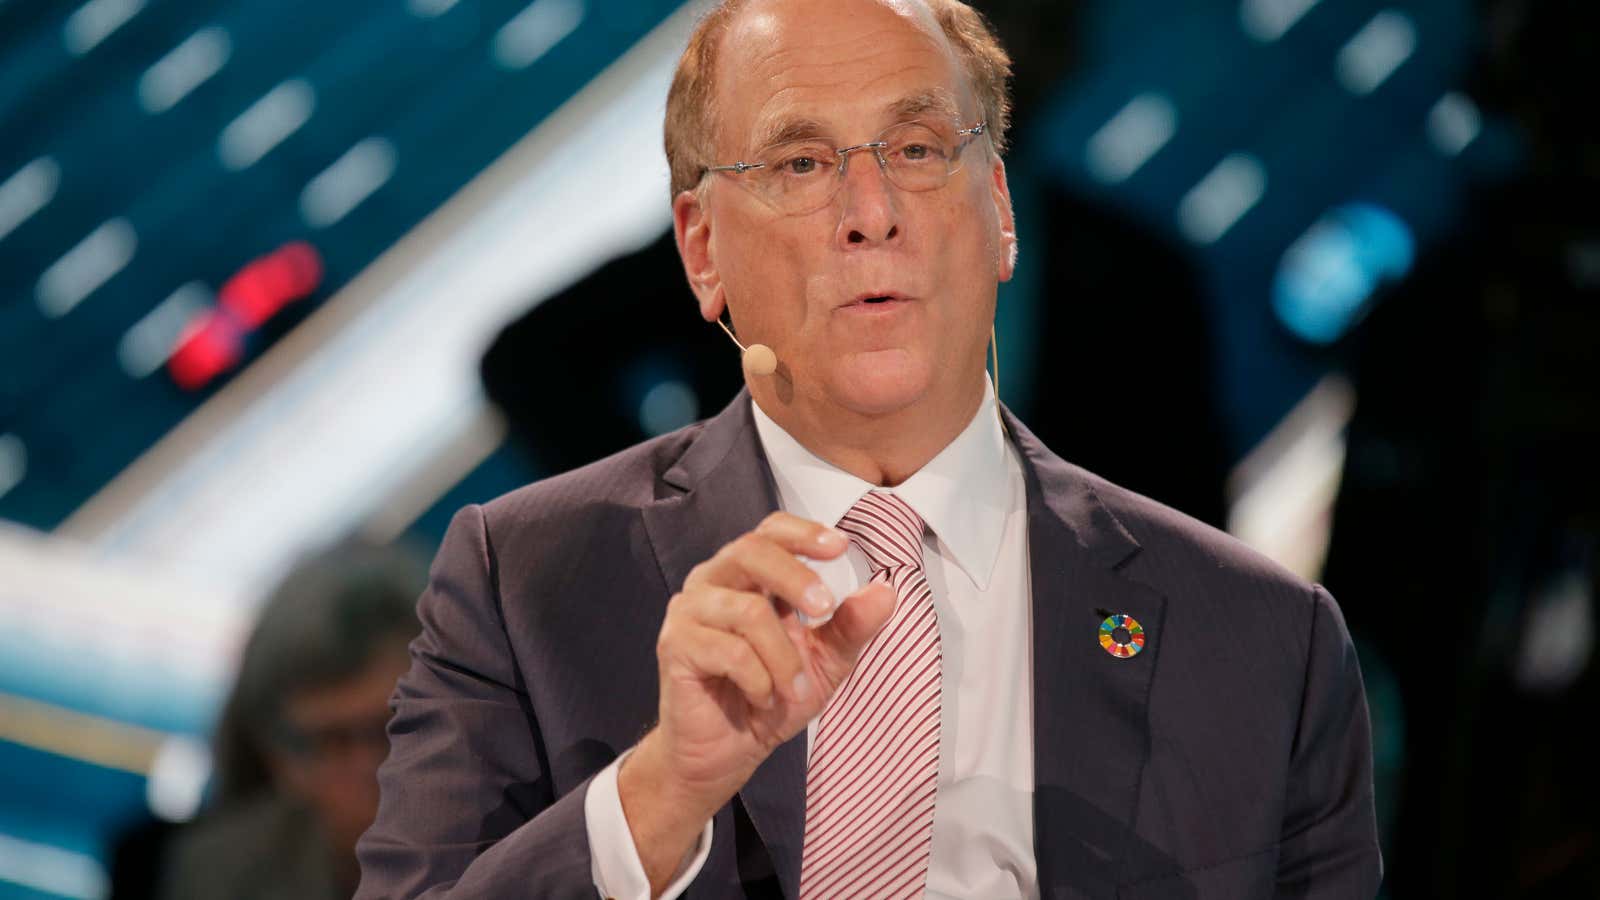 BlackRock chairman and CEO Larry Fink isn’t just talking the talk now.